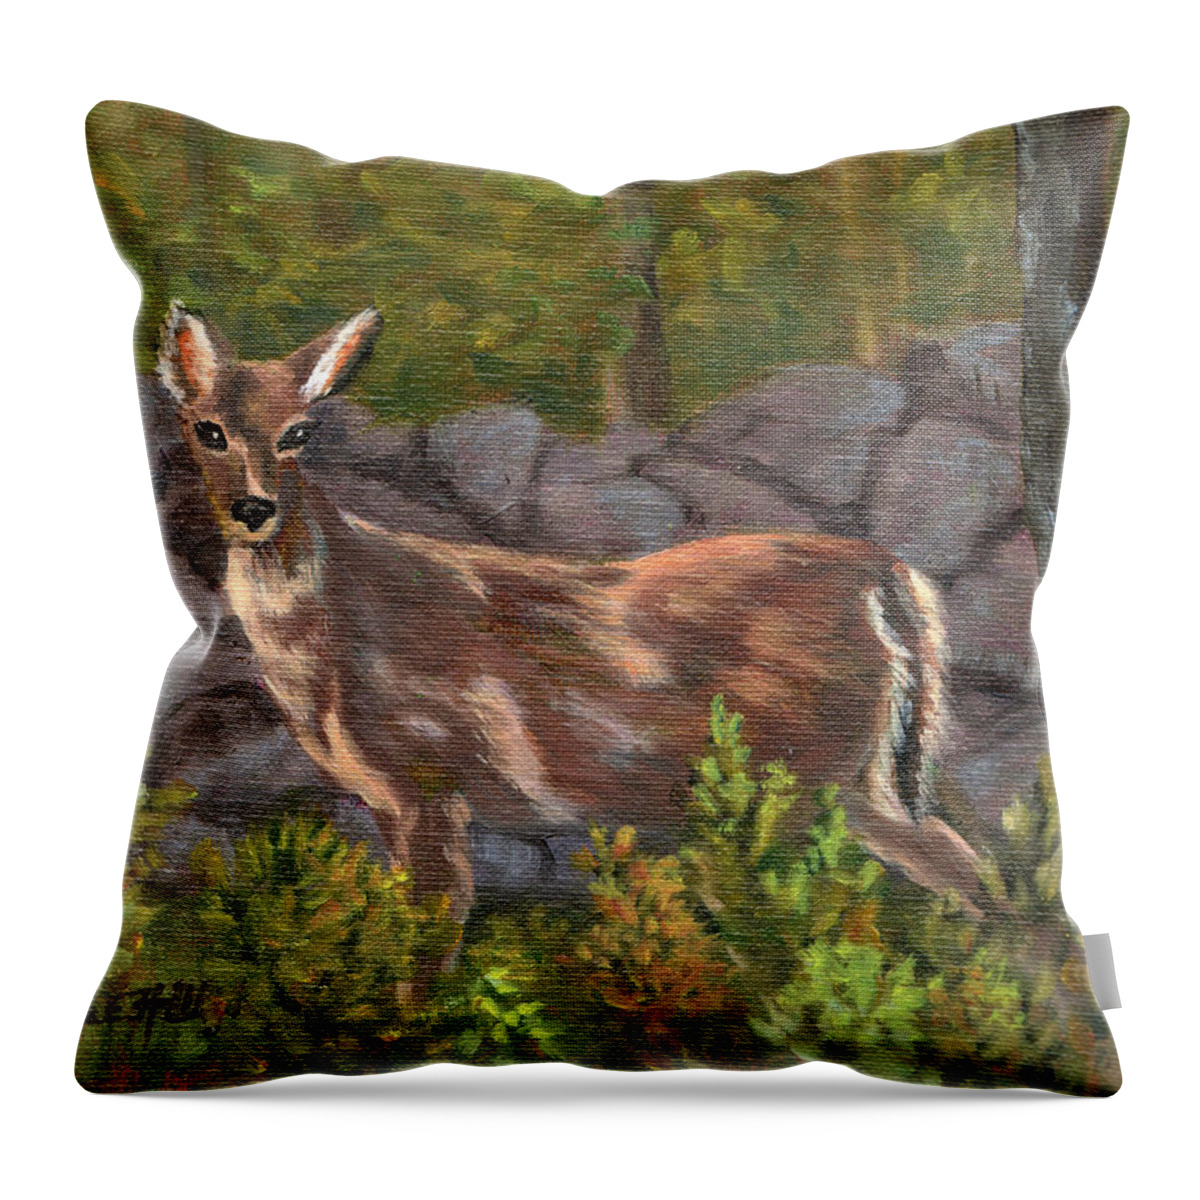 Deer Throw Pillow featuring the painting Stately Doe by Sharon E Allen